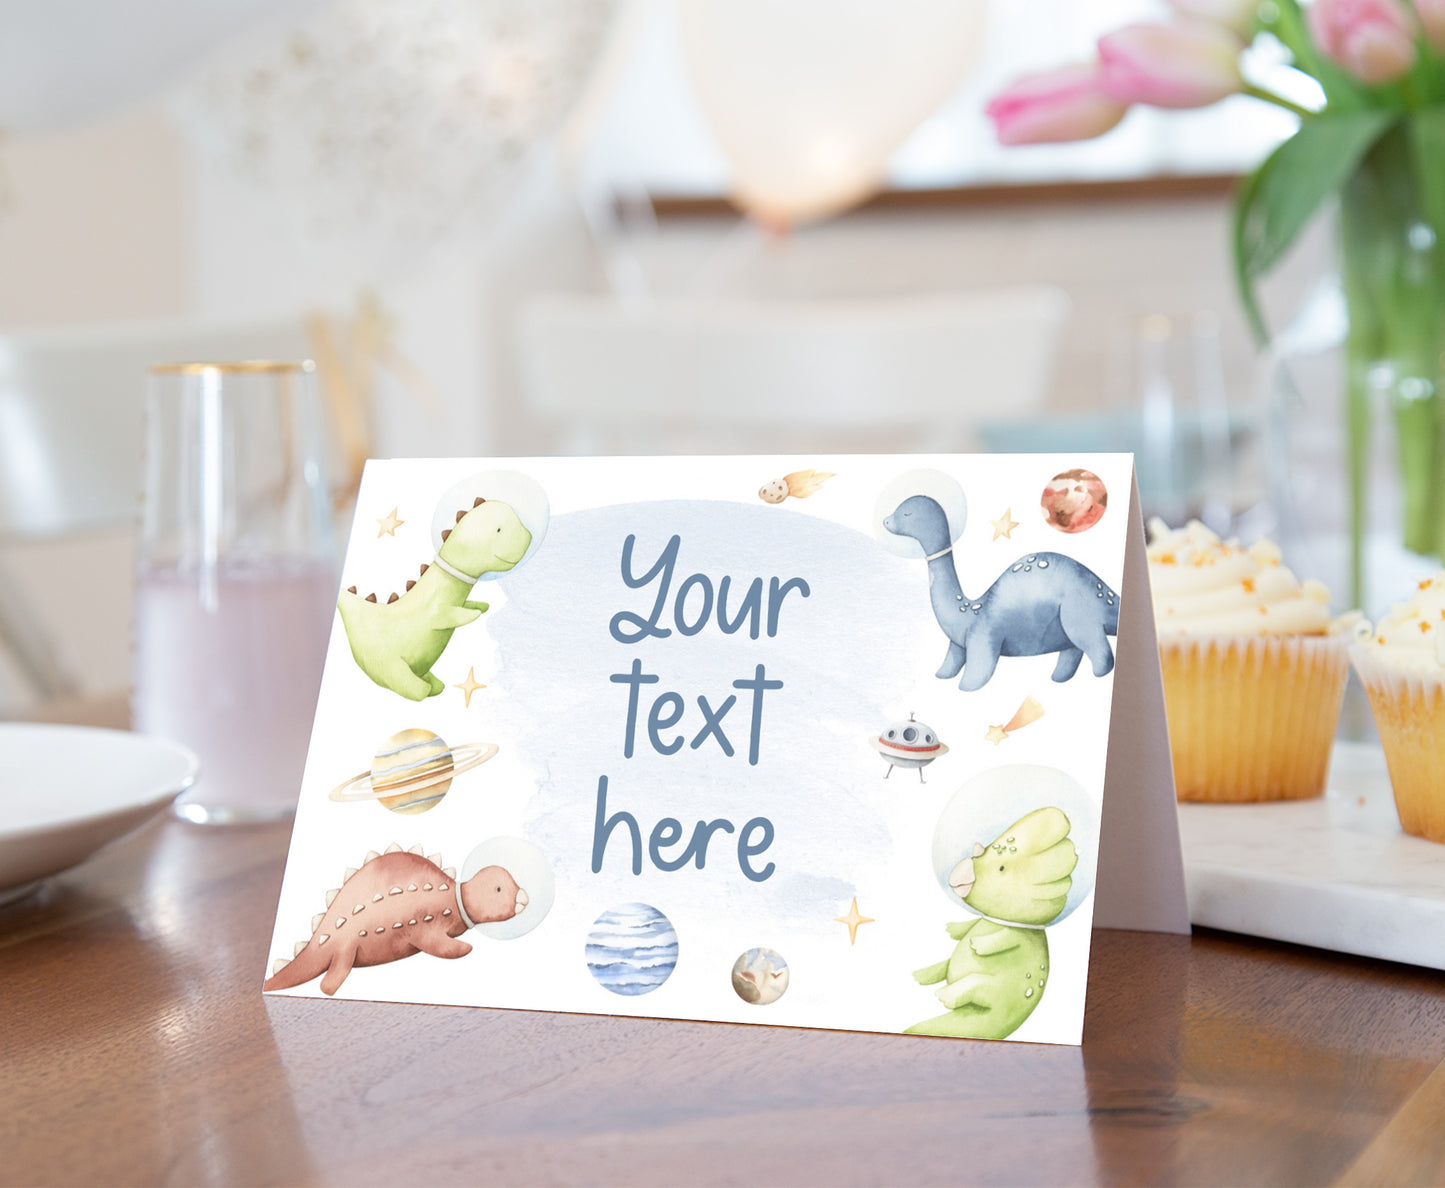 Editable Space Dinosaurs Place Cards | Dino Astronaut Party Decorations - 39D